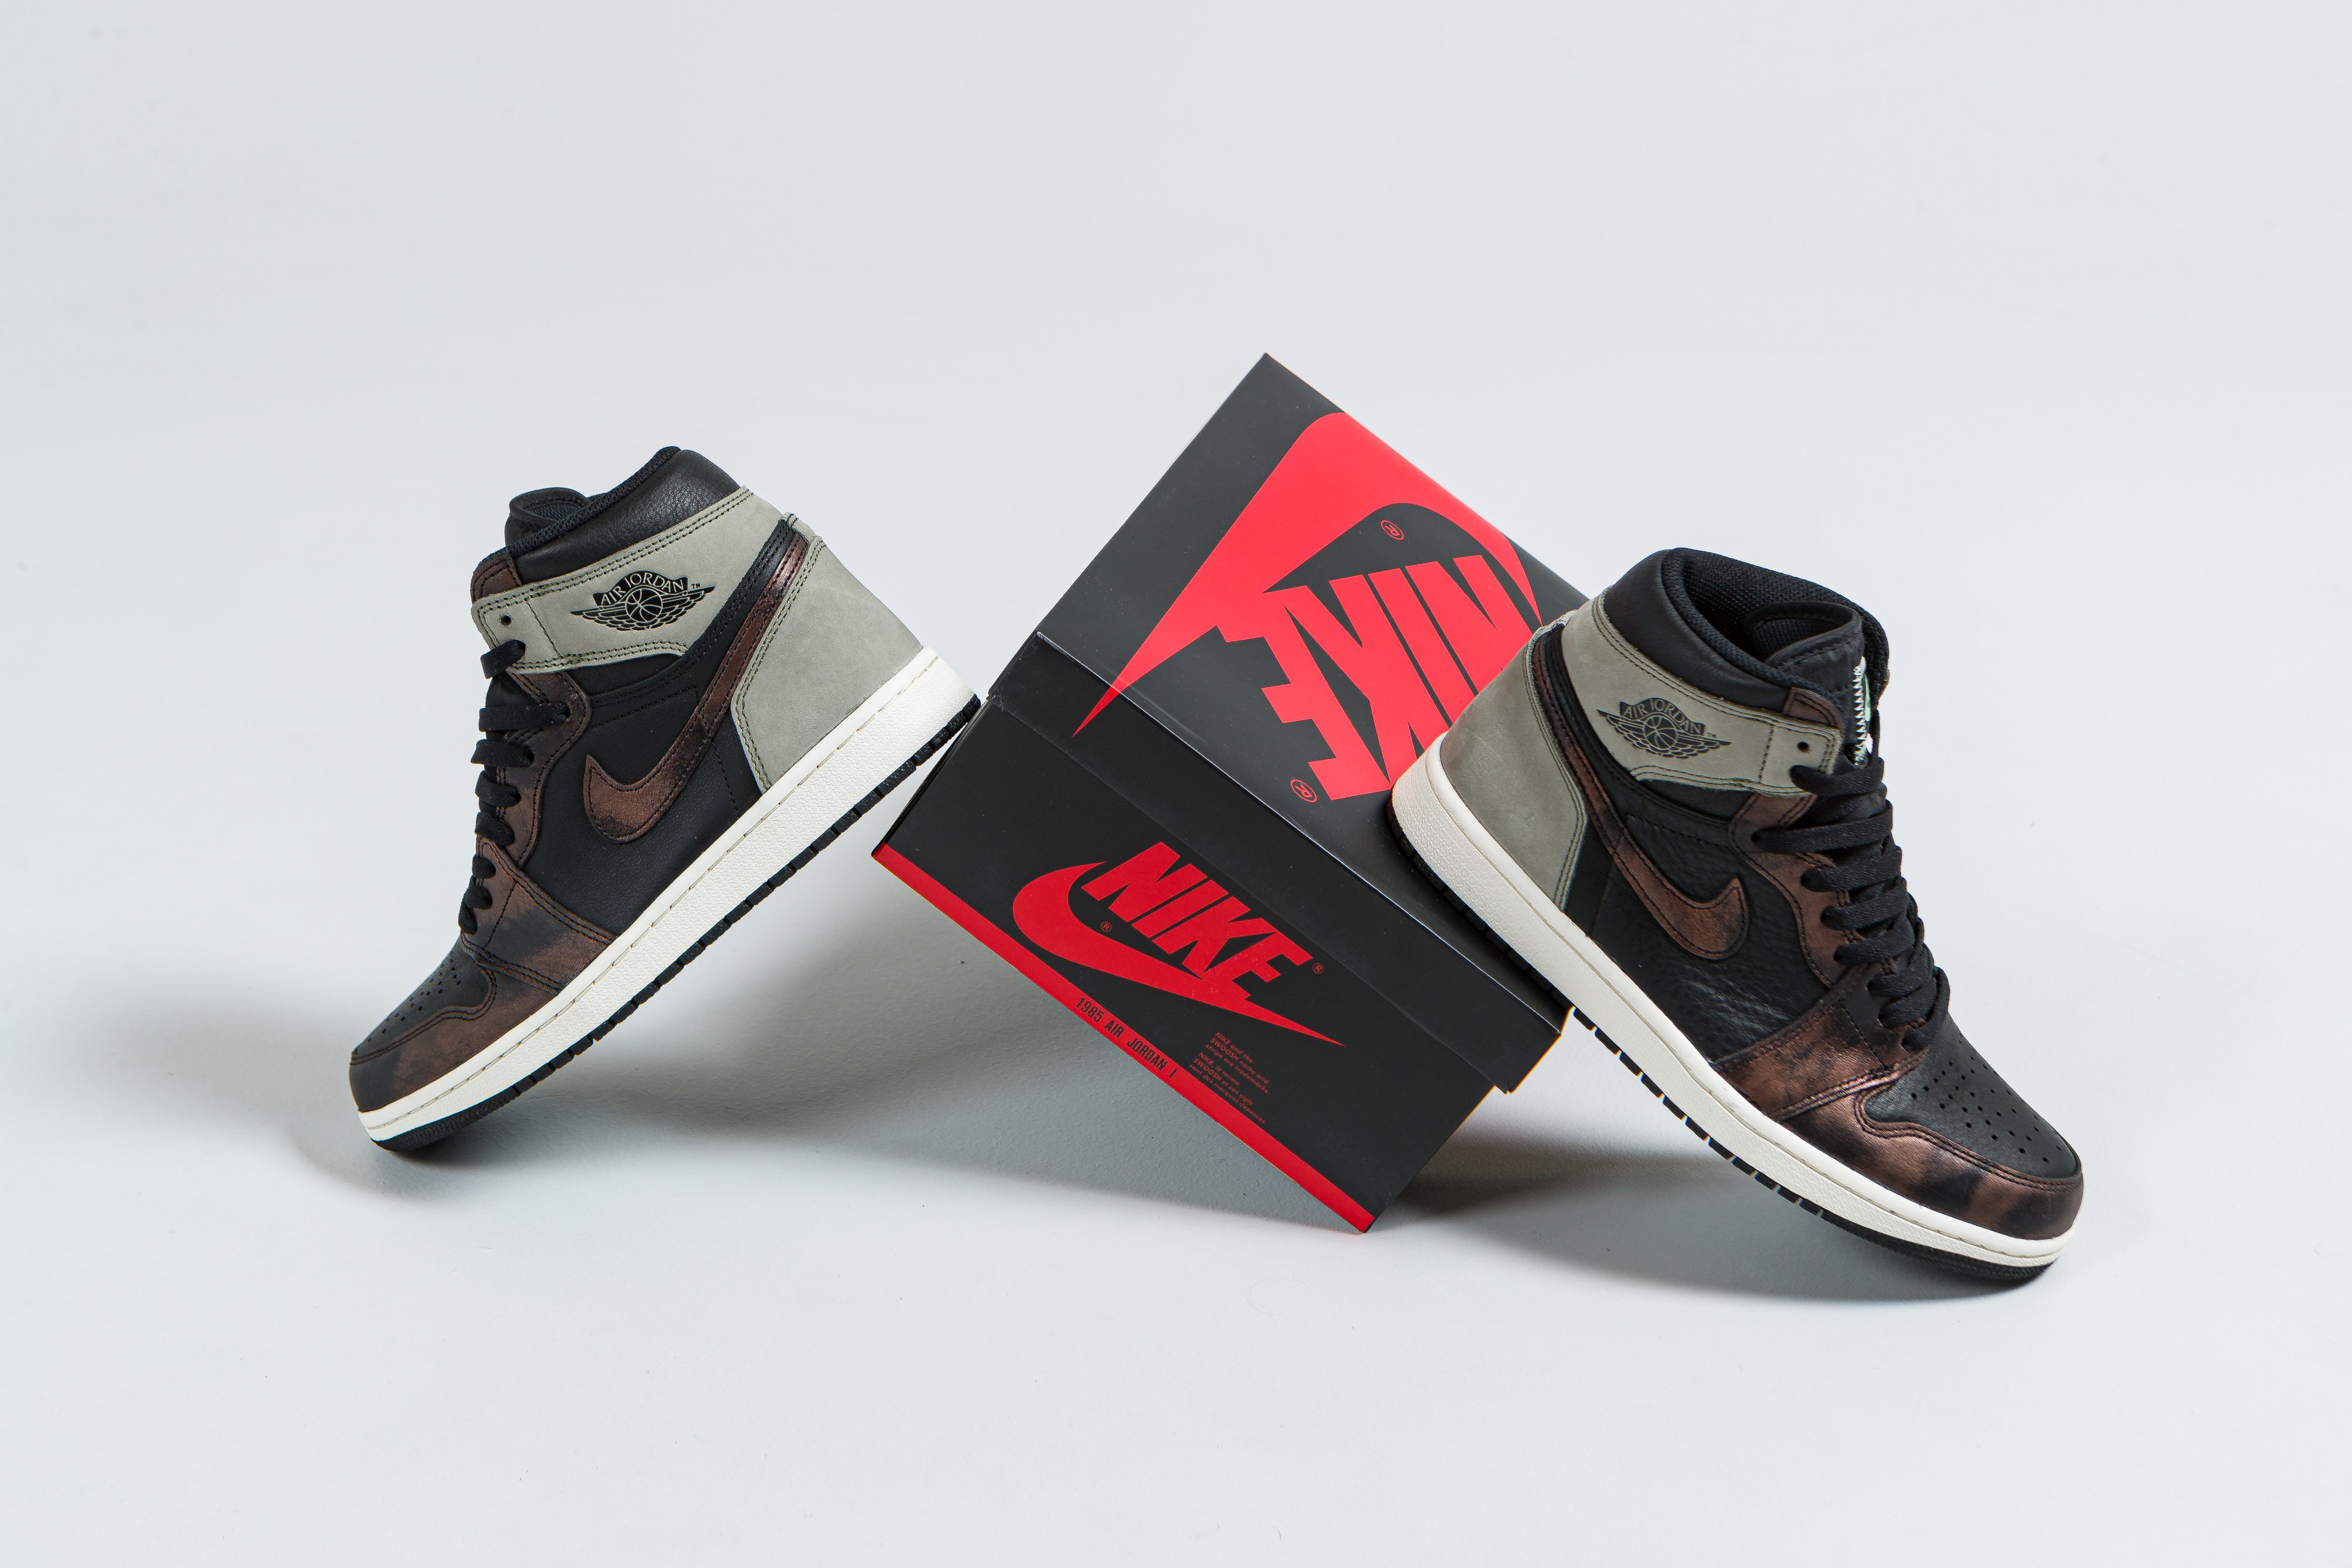 Up There Launches - Nike Air Jordan 1 Retro High OG - 'Patina'